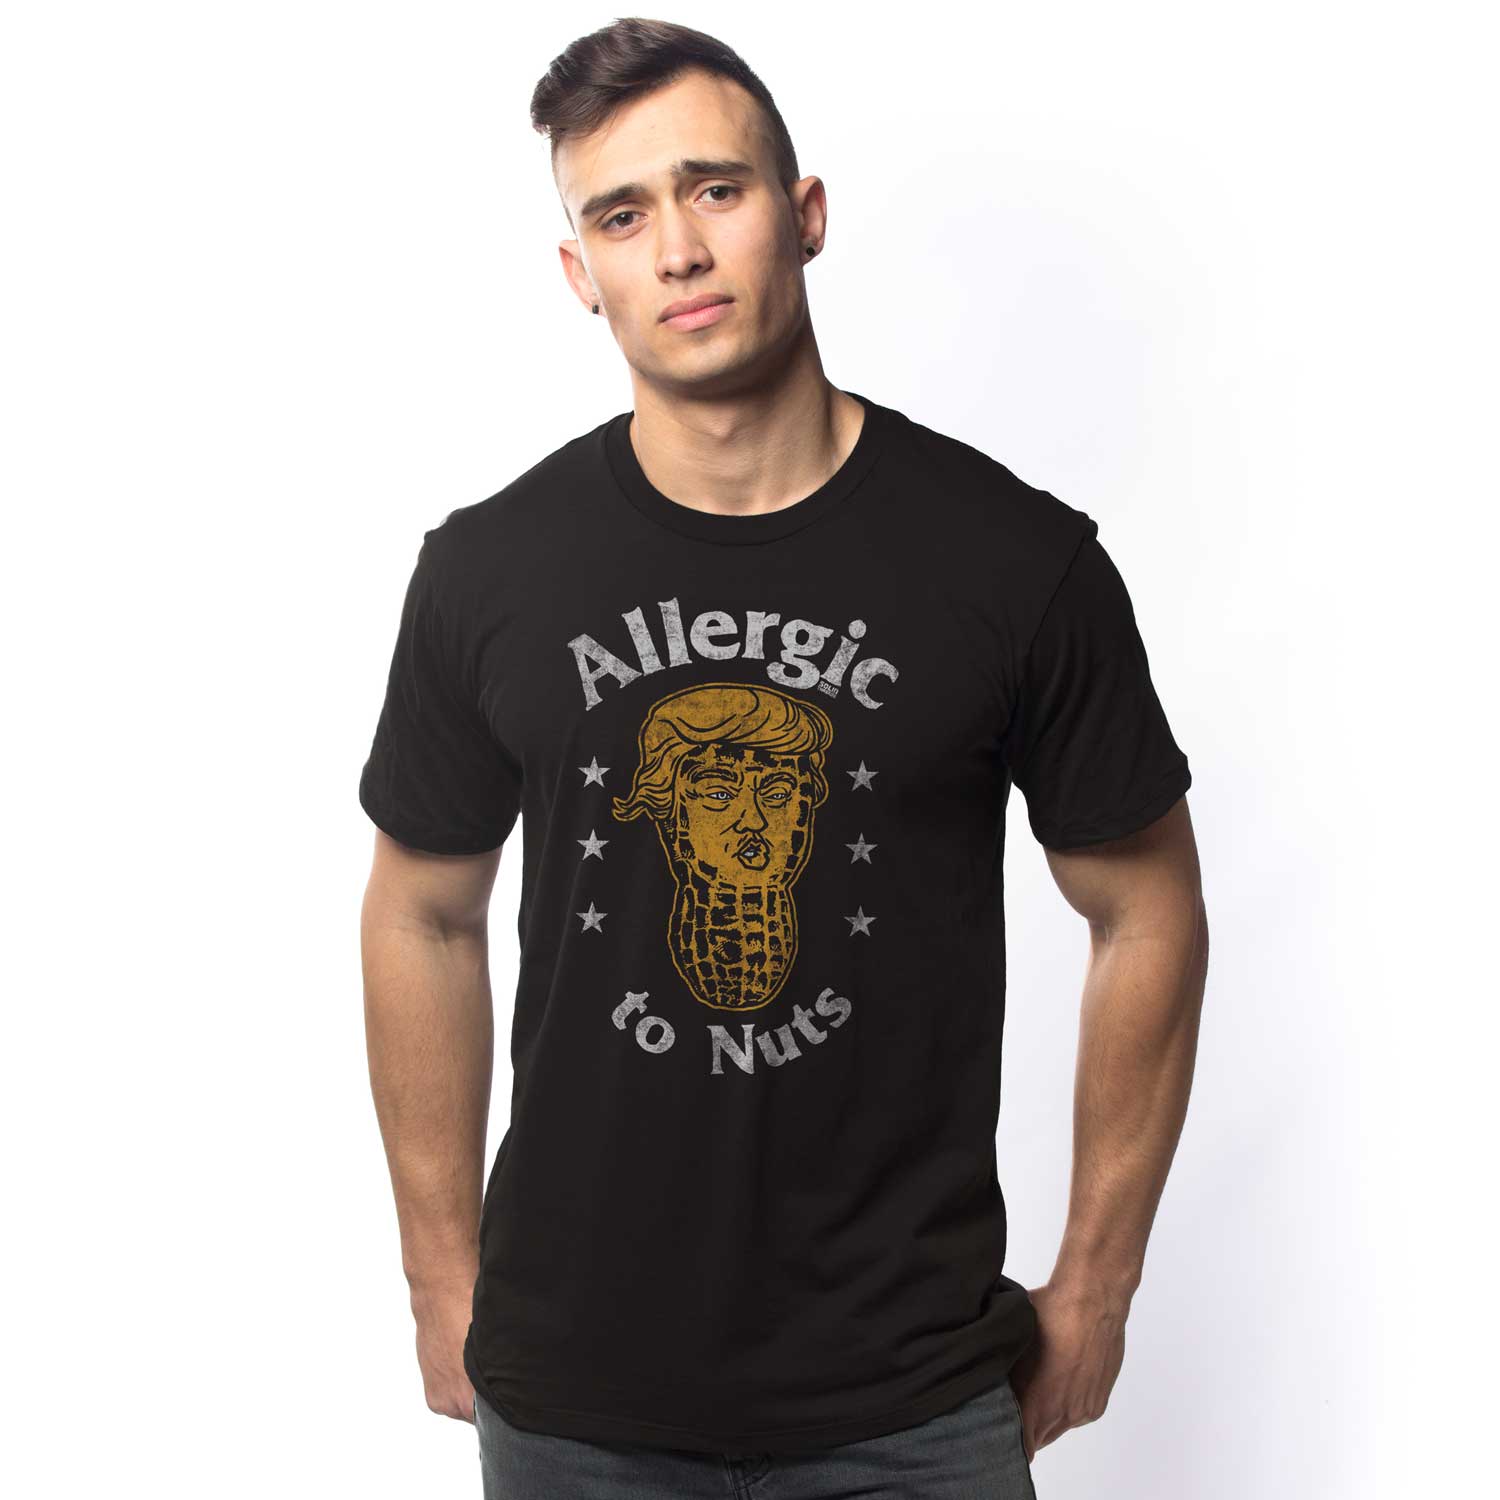 Men's Allergic To Nuts Vintage Graphic T-Shirt | Funny Anti Trump Blackwash Tee | Solid Threads